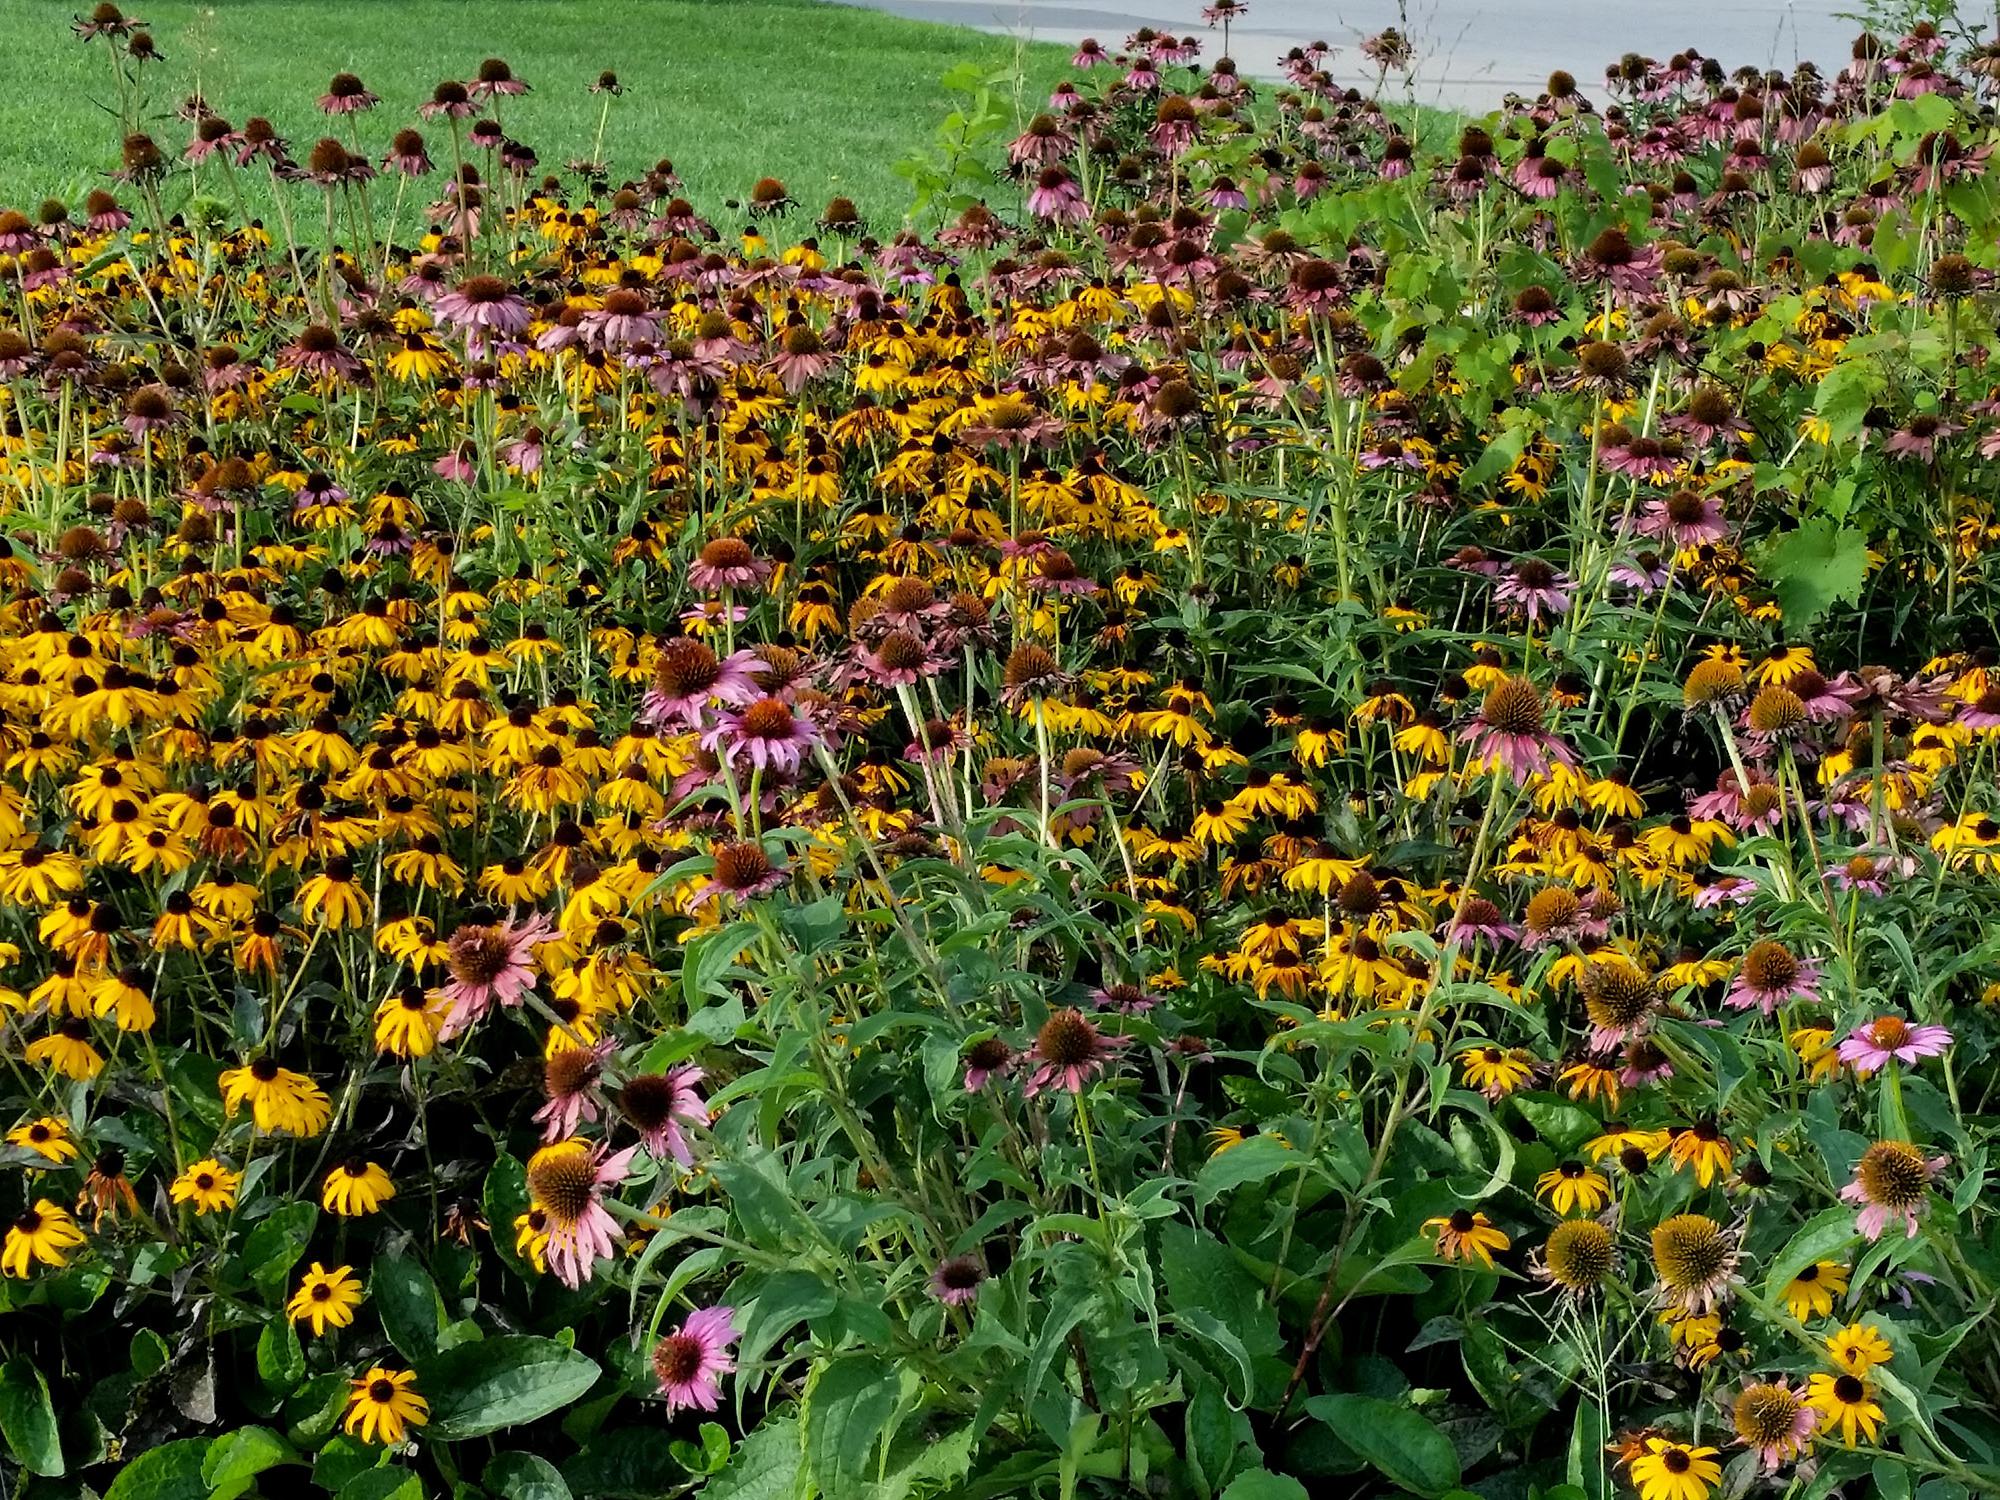 A sea of yellow flowers with black centers and pink flowers with orange centers cover a flower bed.